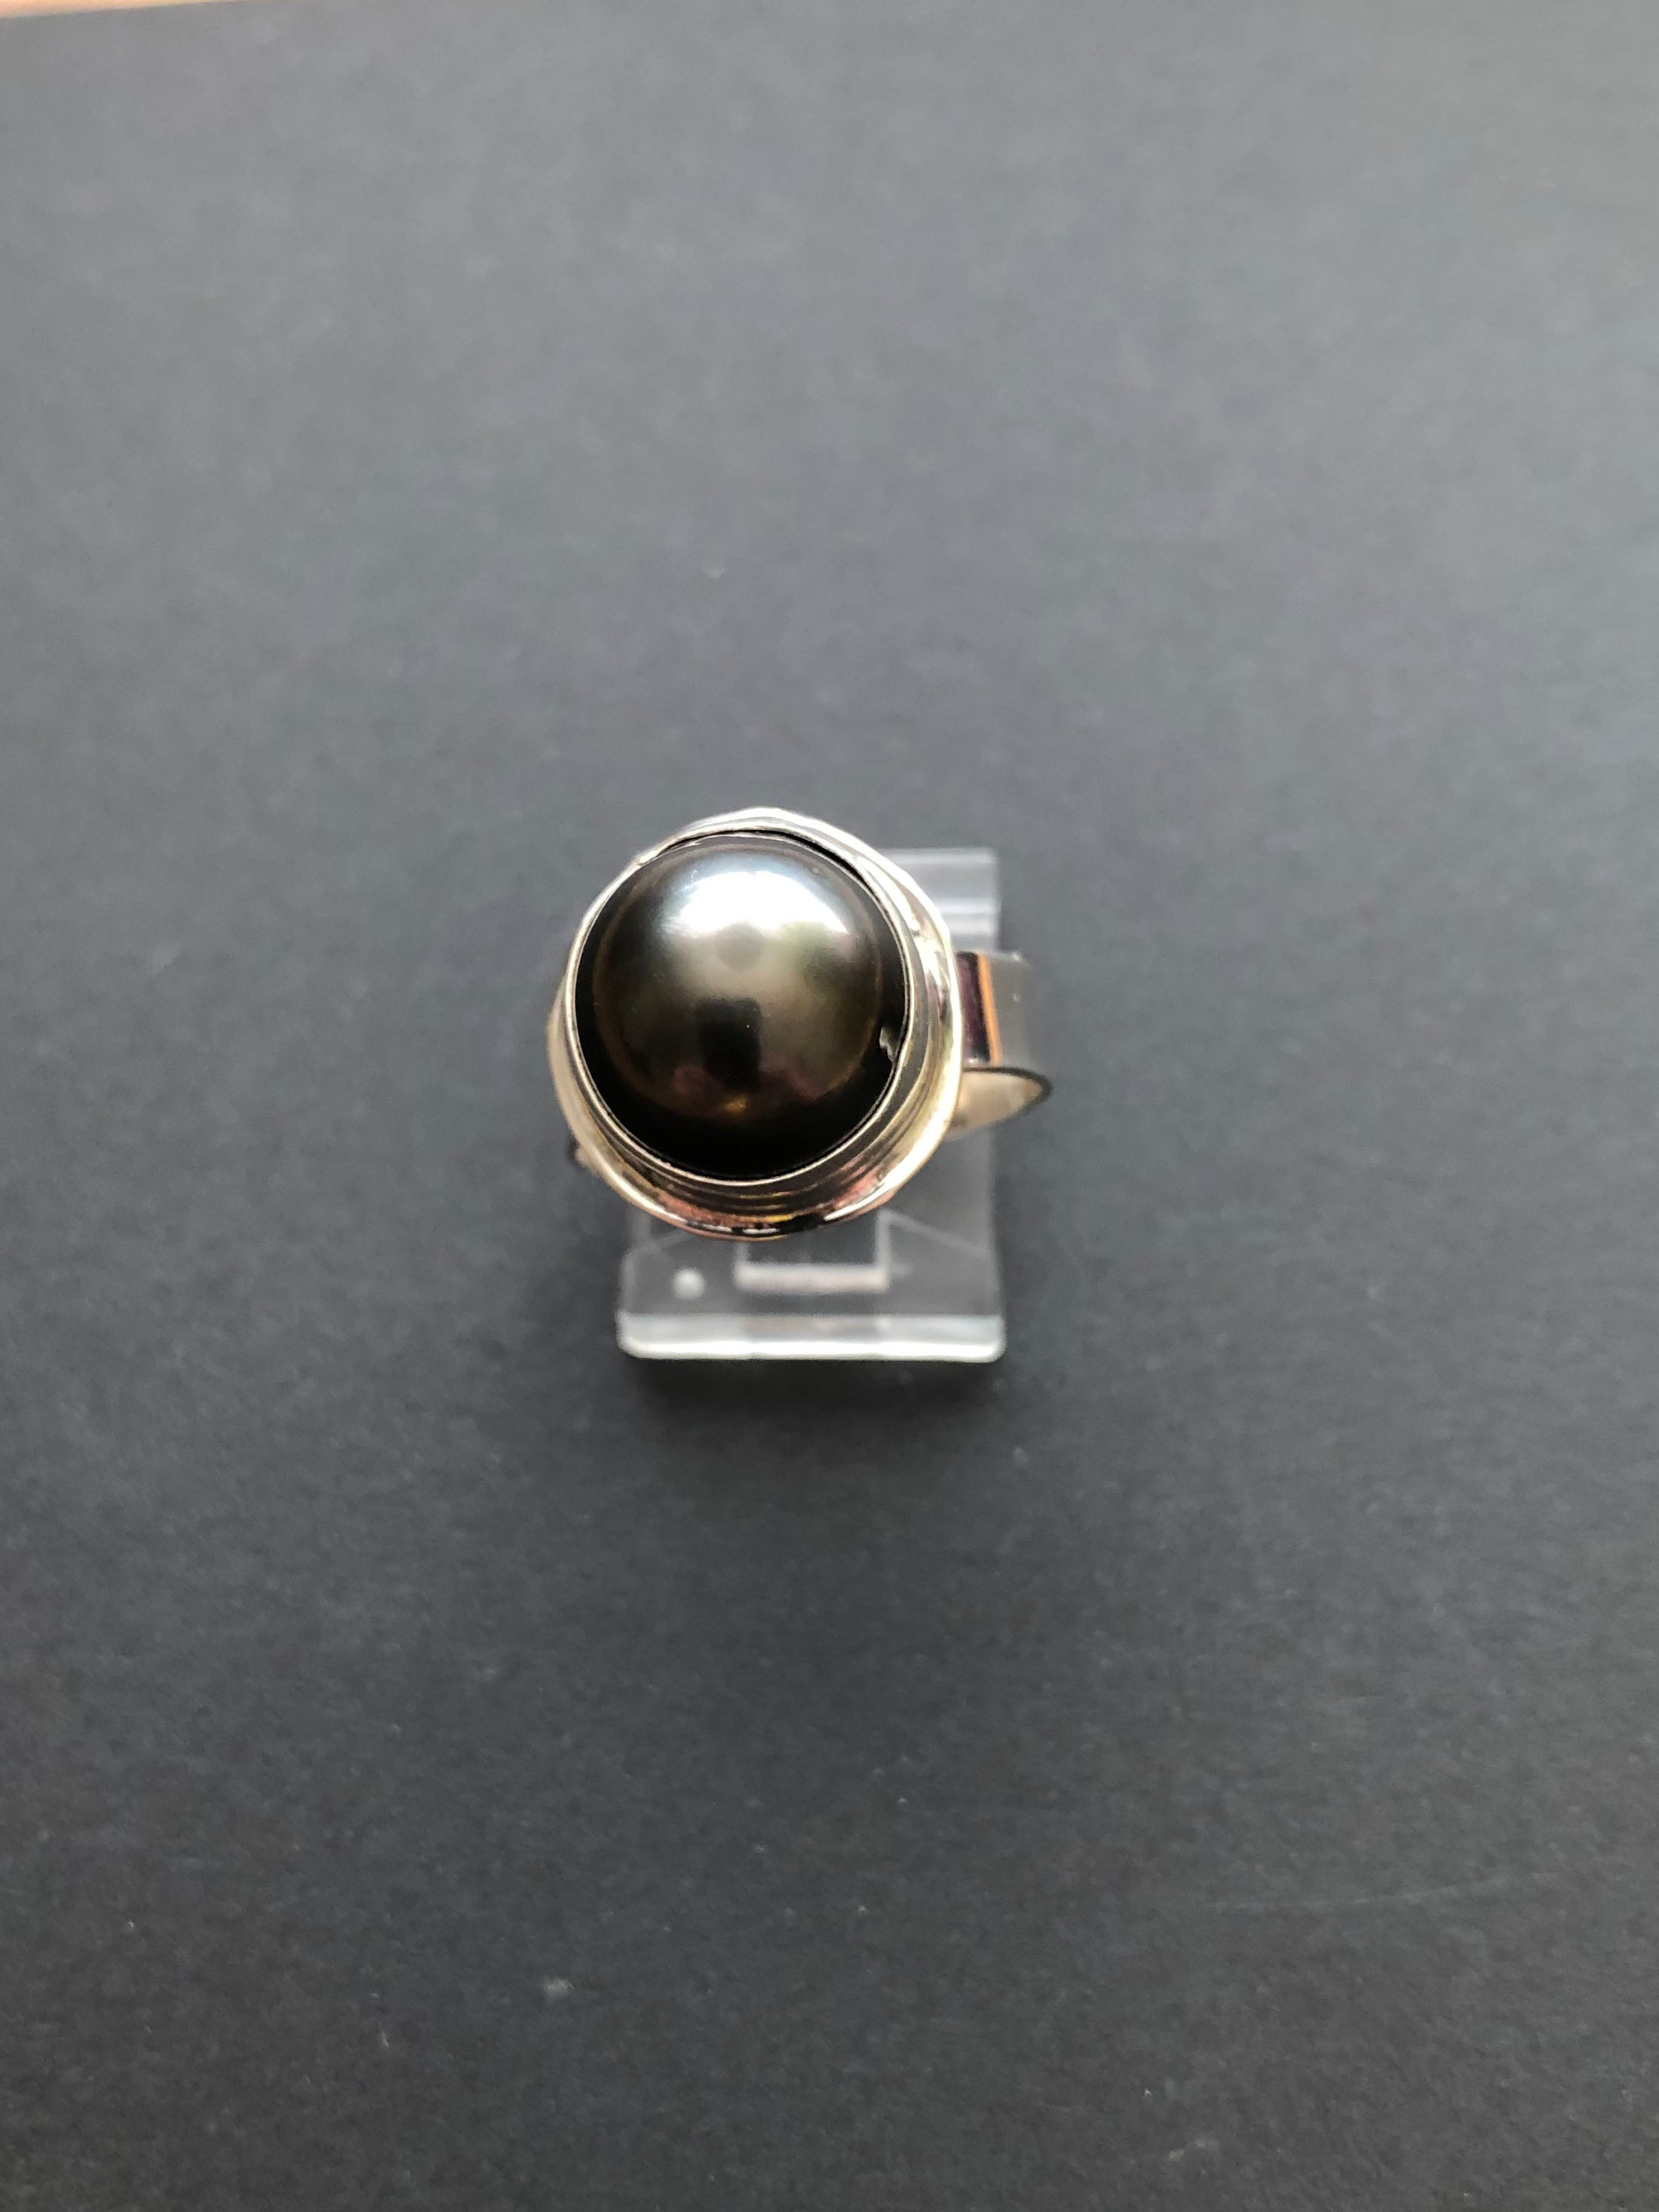 Tahitian Black Pearl Ring in White Gold with Diamonds – Maui Divers Jewelry